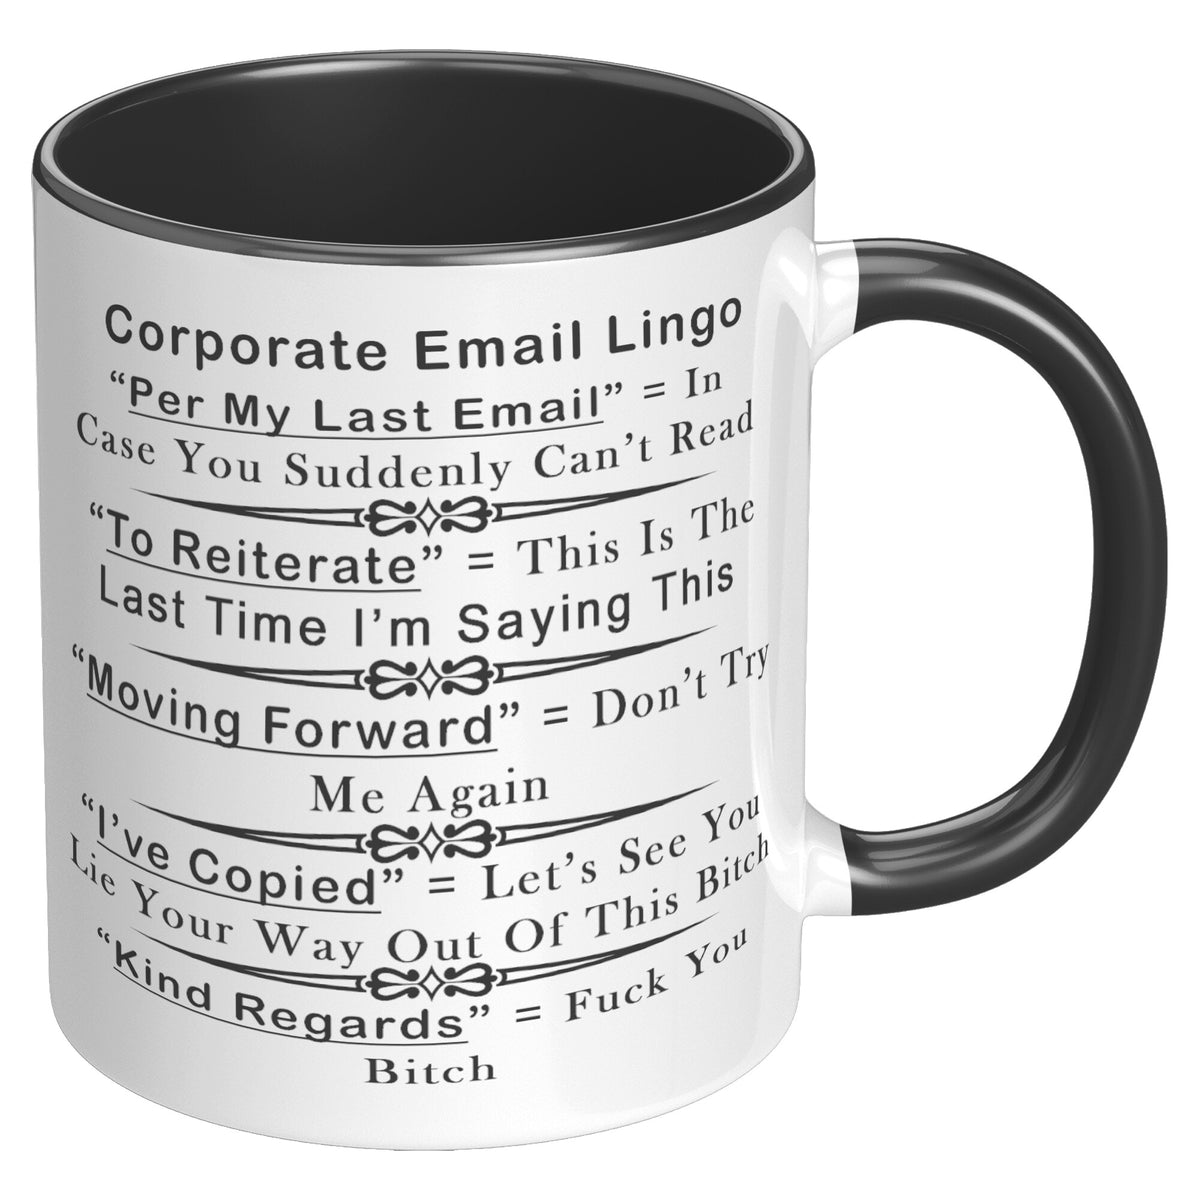 Funny Mug For Coworkers Friends - Corporate Lingo Email Accent Mug 11oz